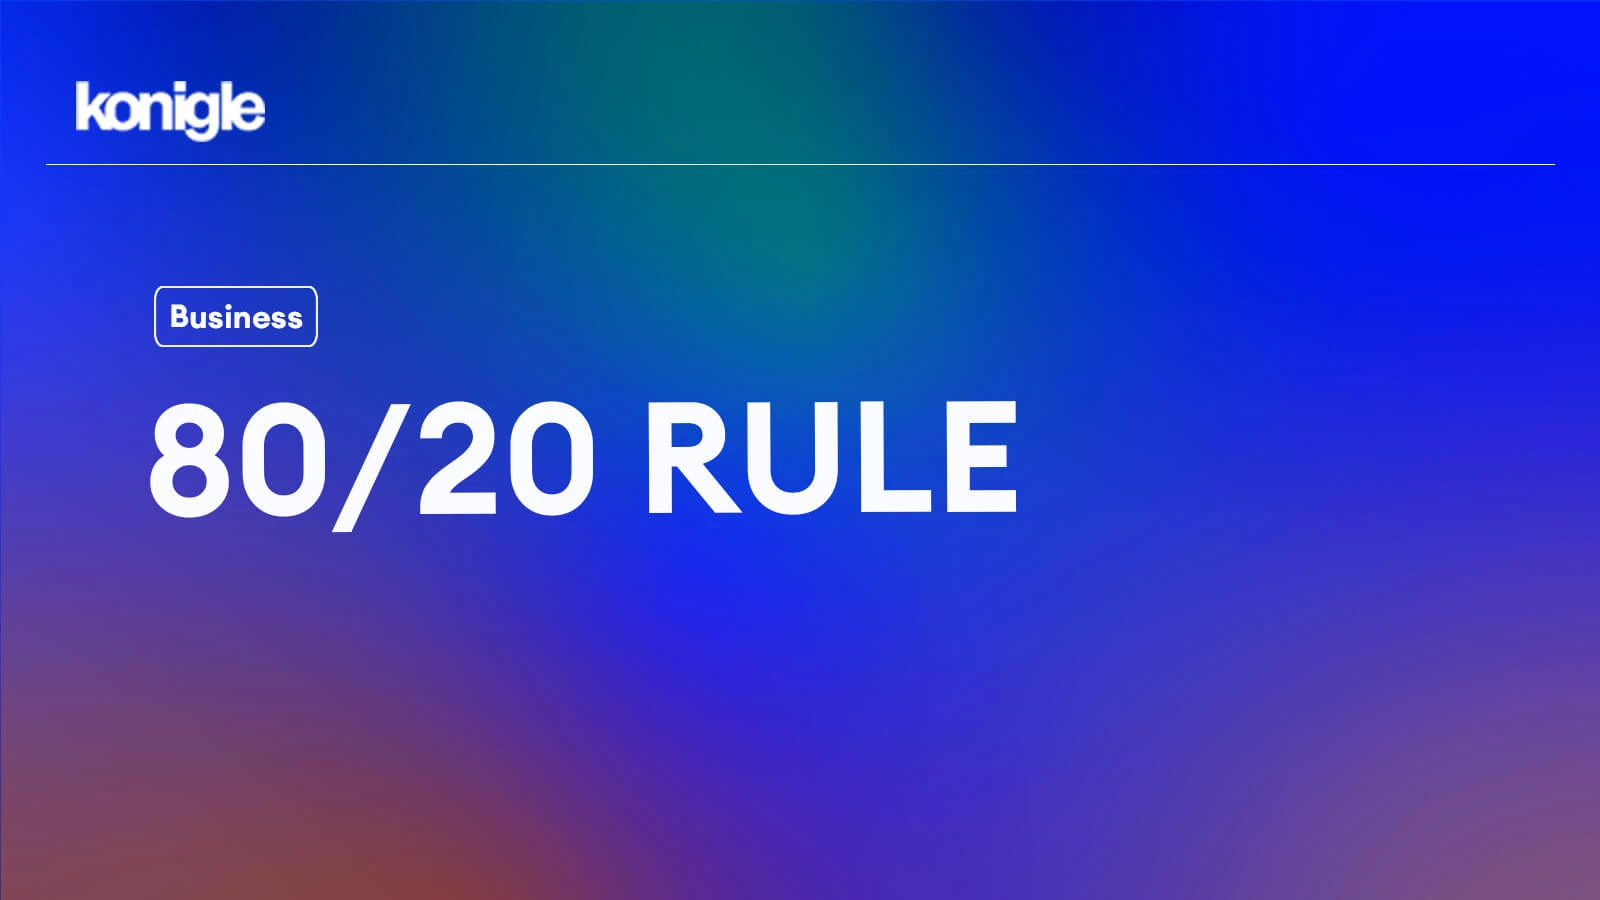 The 80/20 rule and how it can change your business